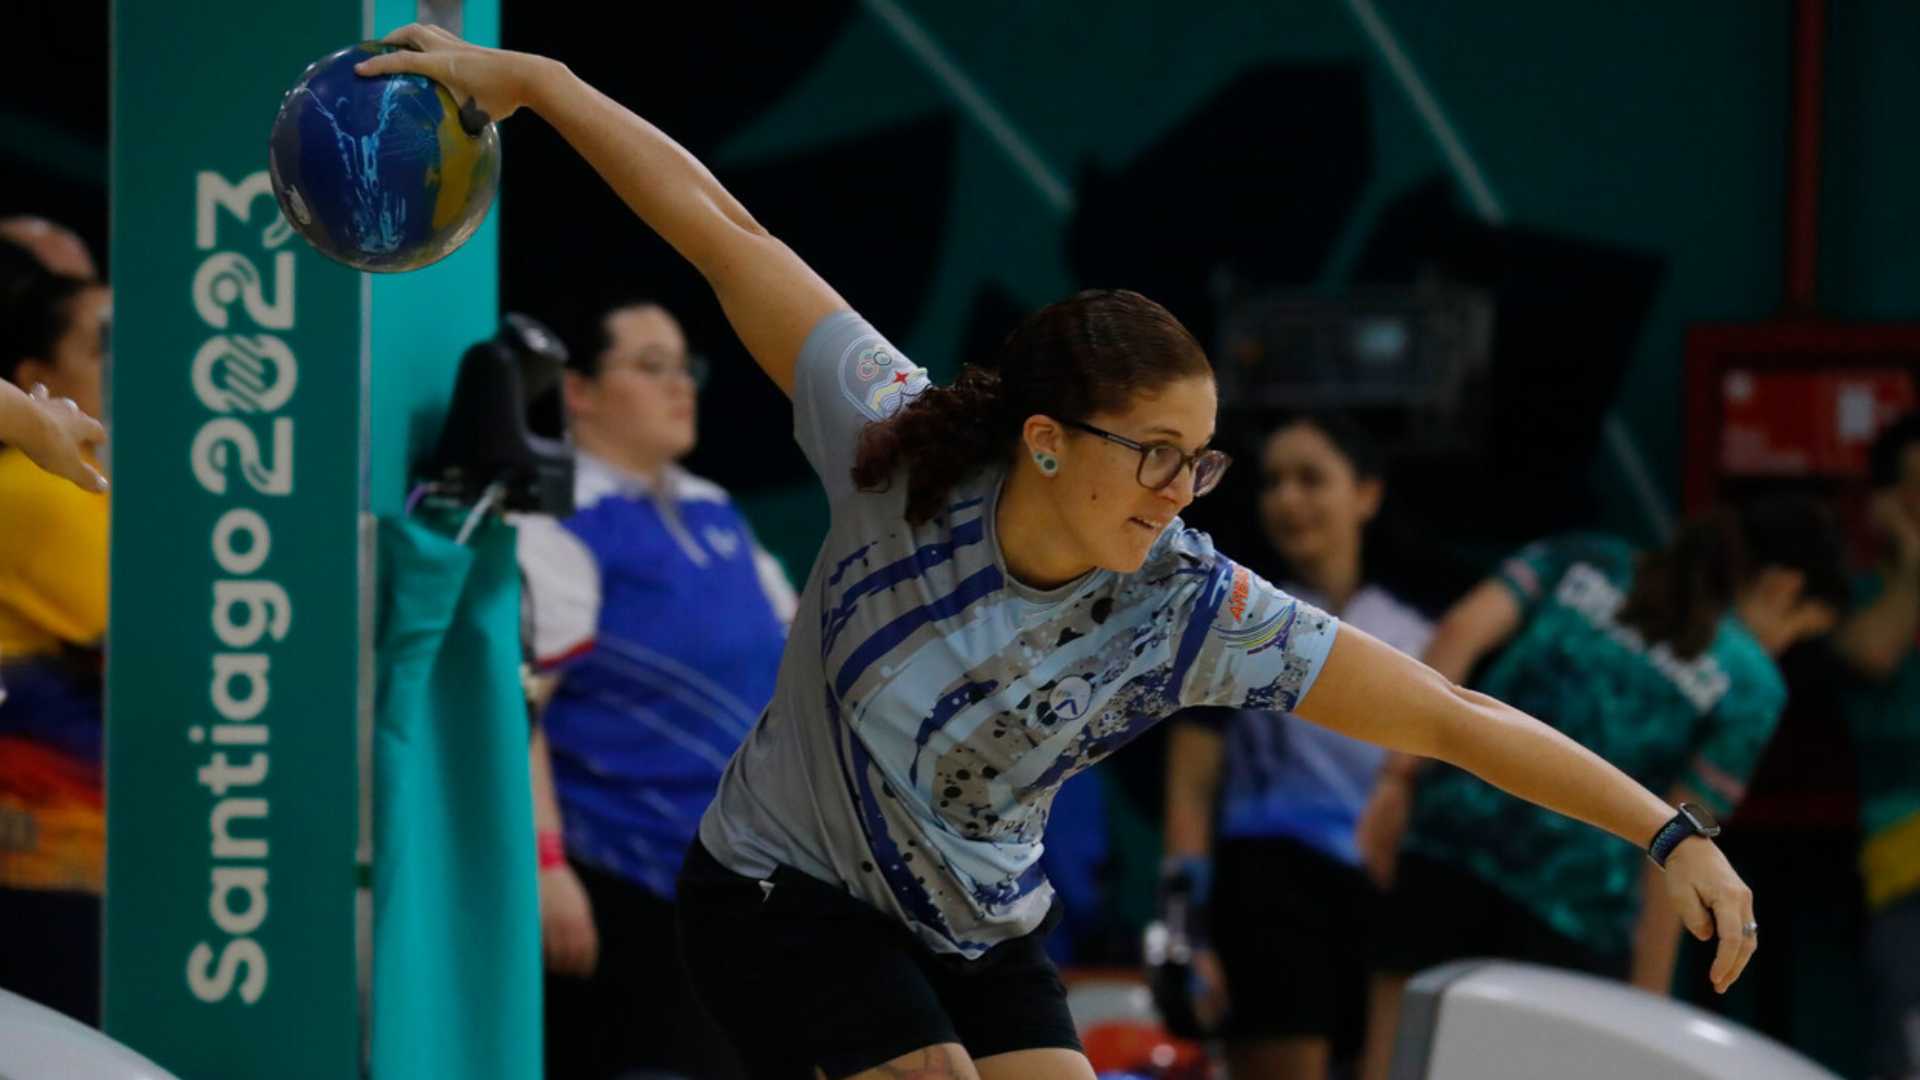 Aruba Dominates the First Day of Female's Bowling